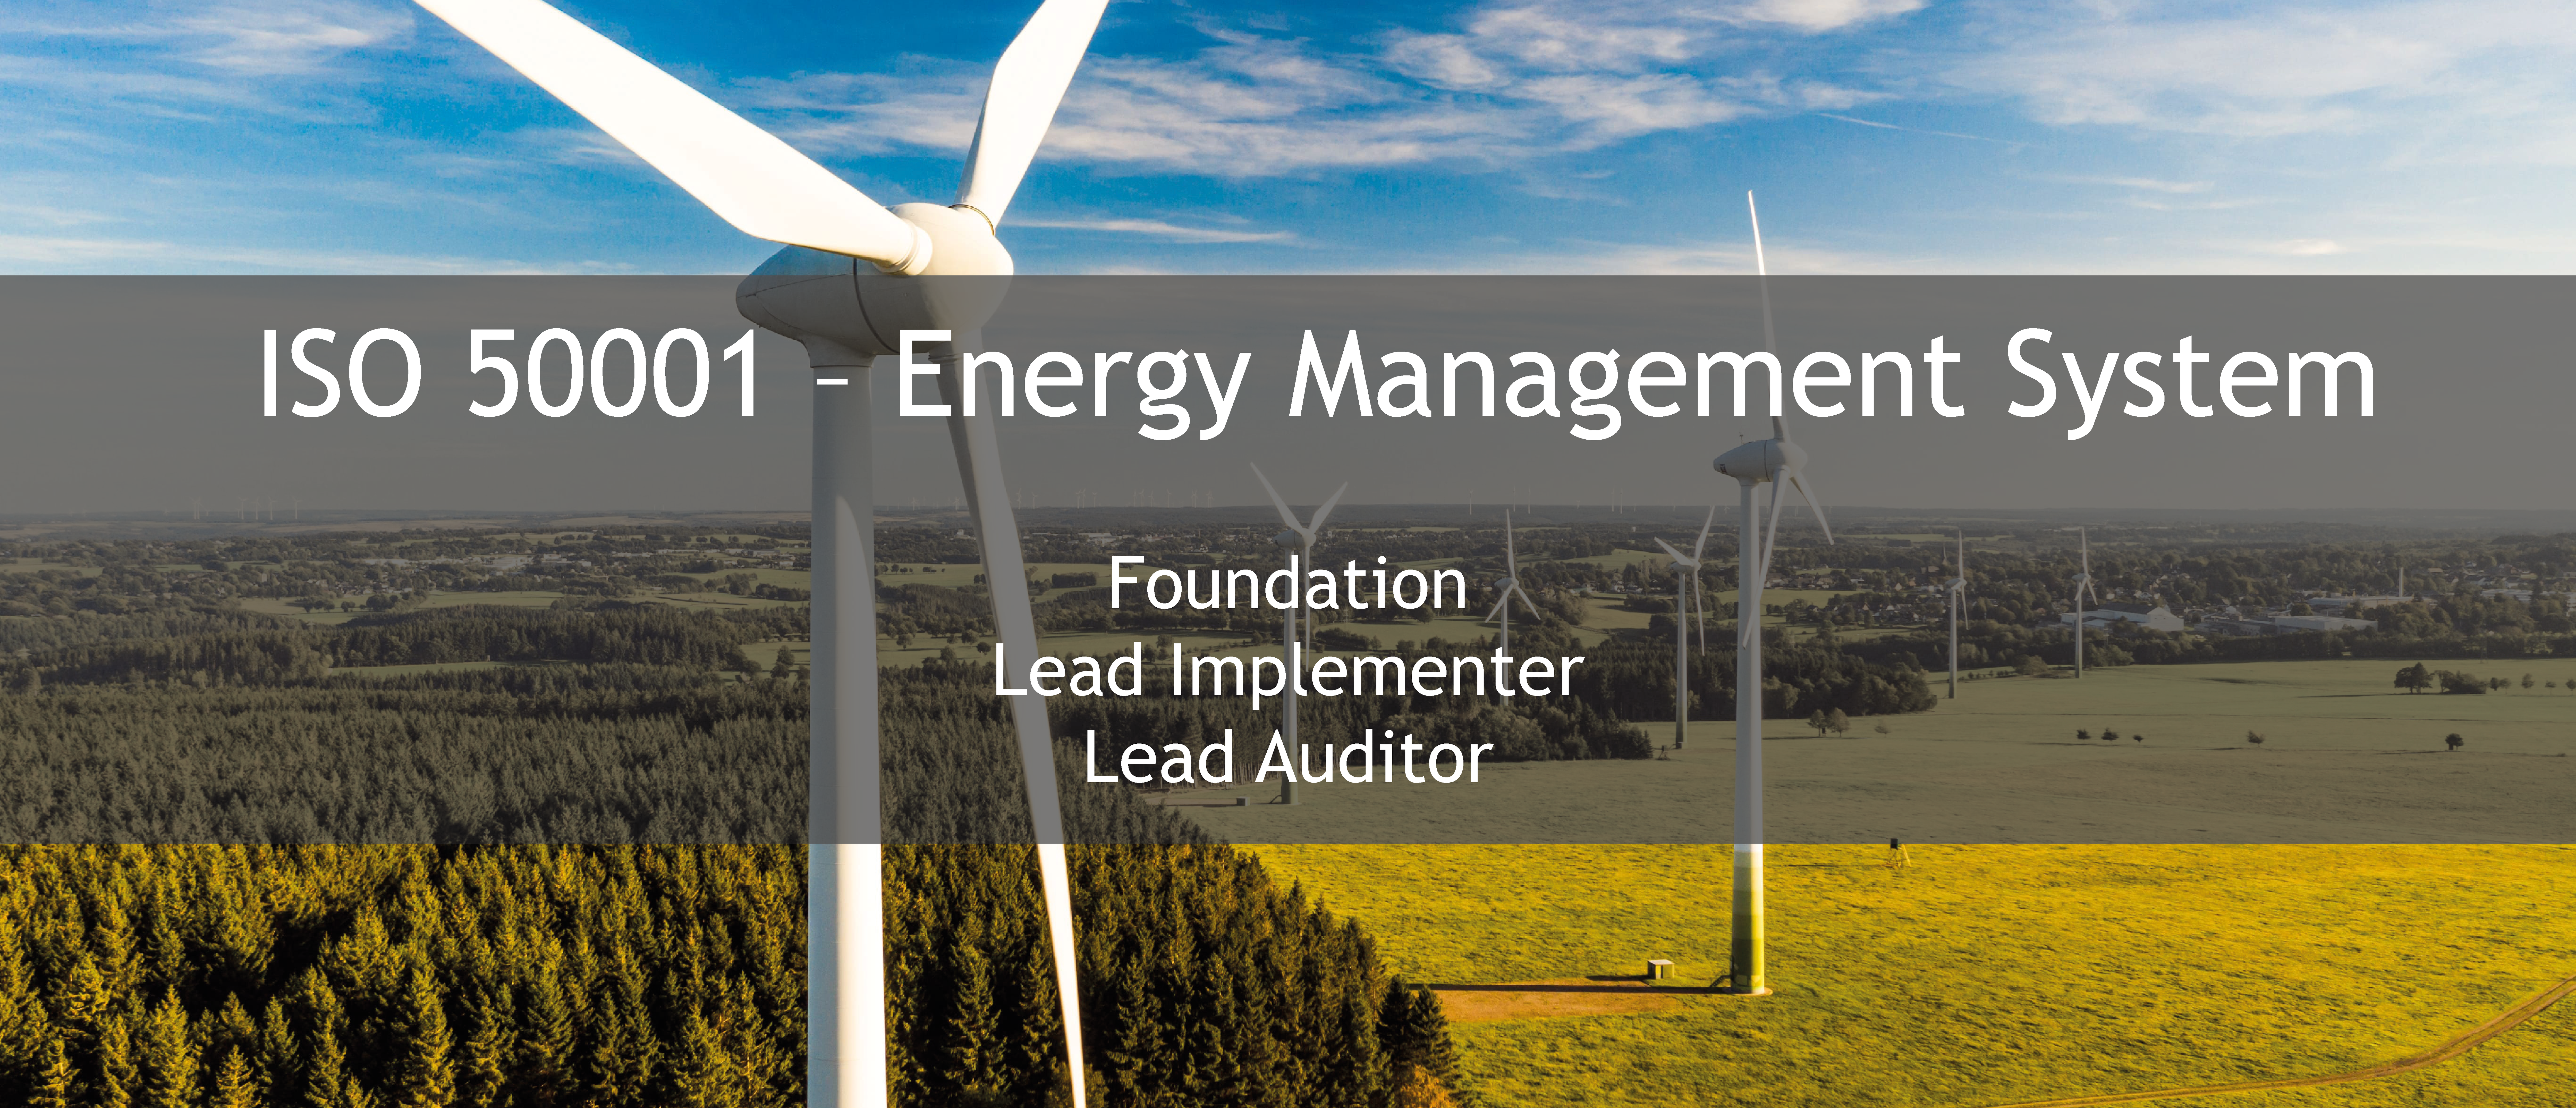 ISO 50001 training offer 1 - ISO 14001 - Environmental management systems